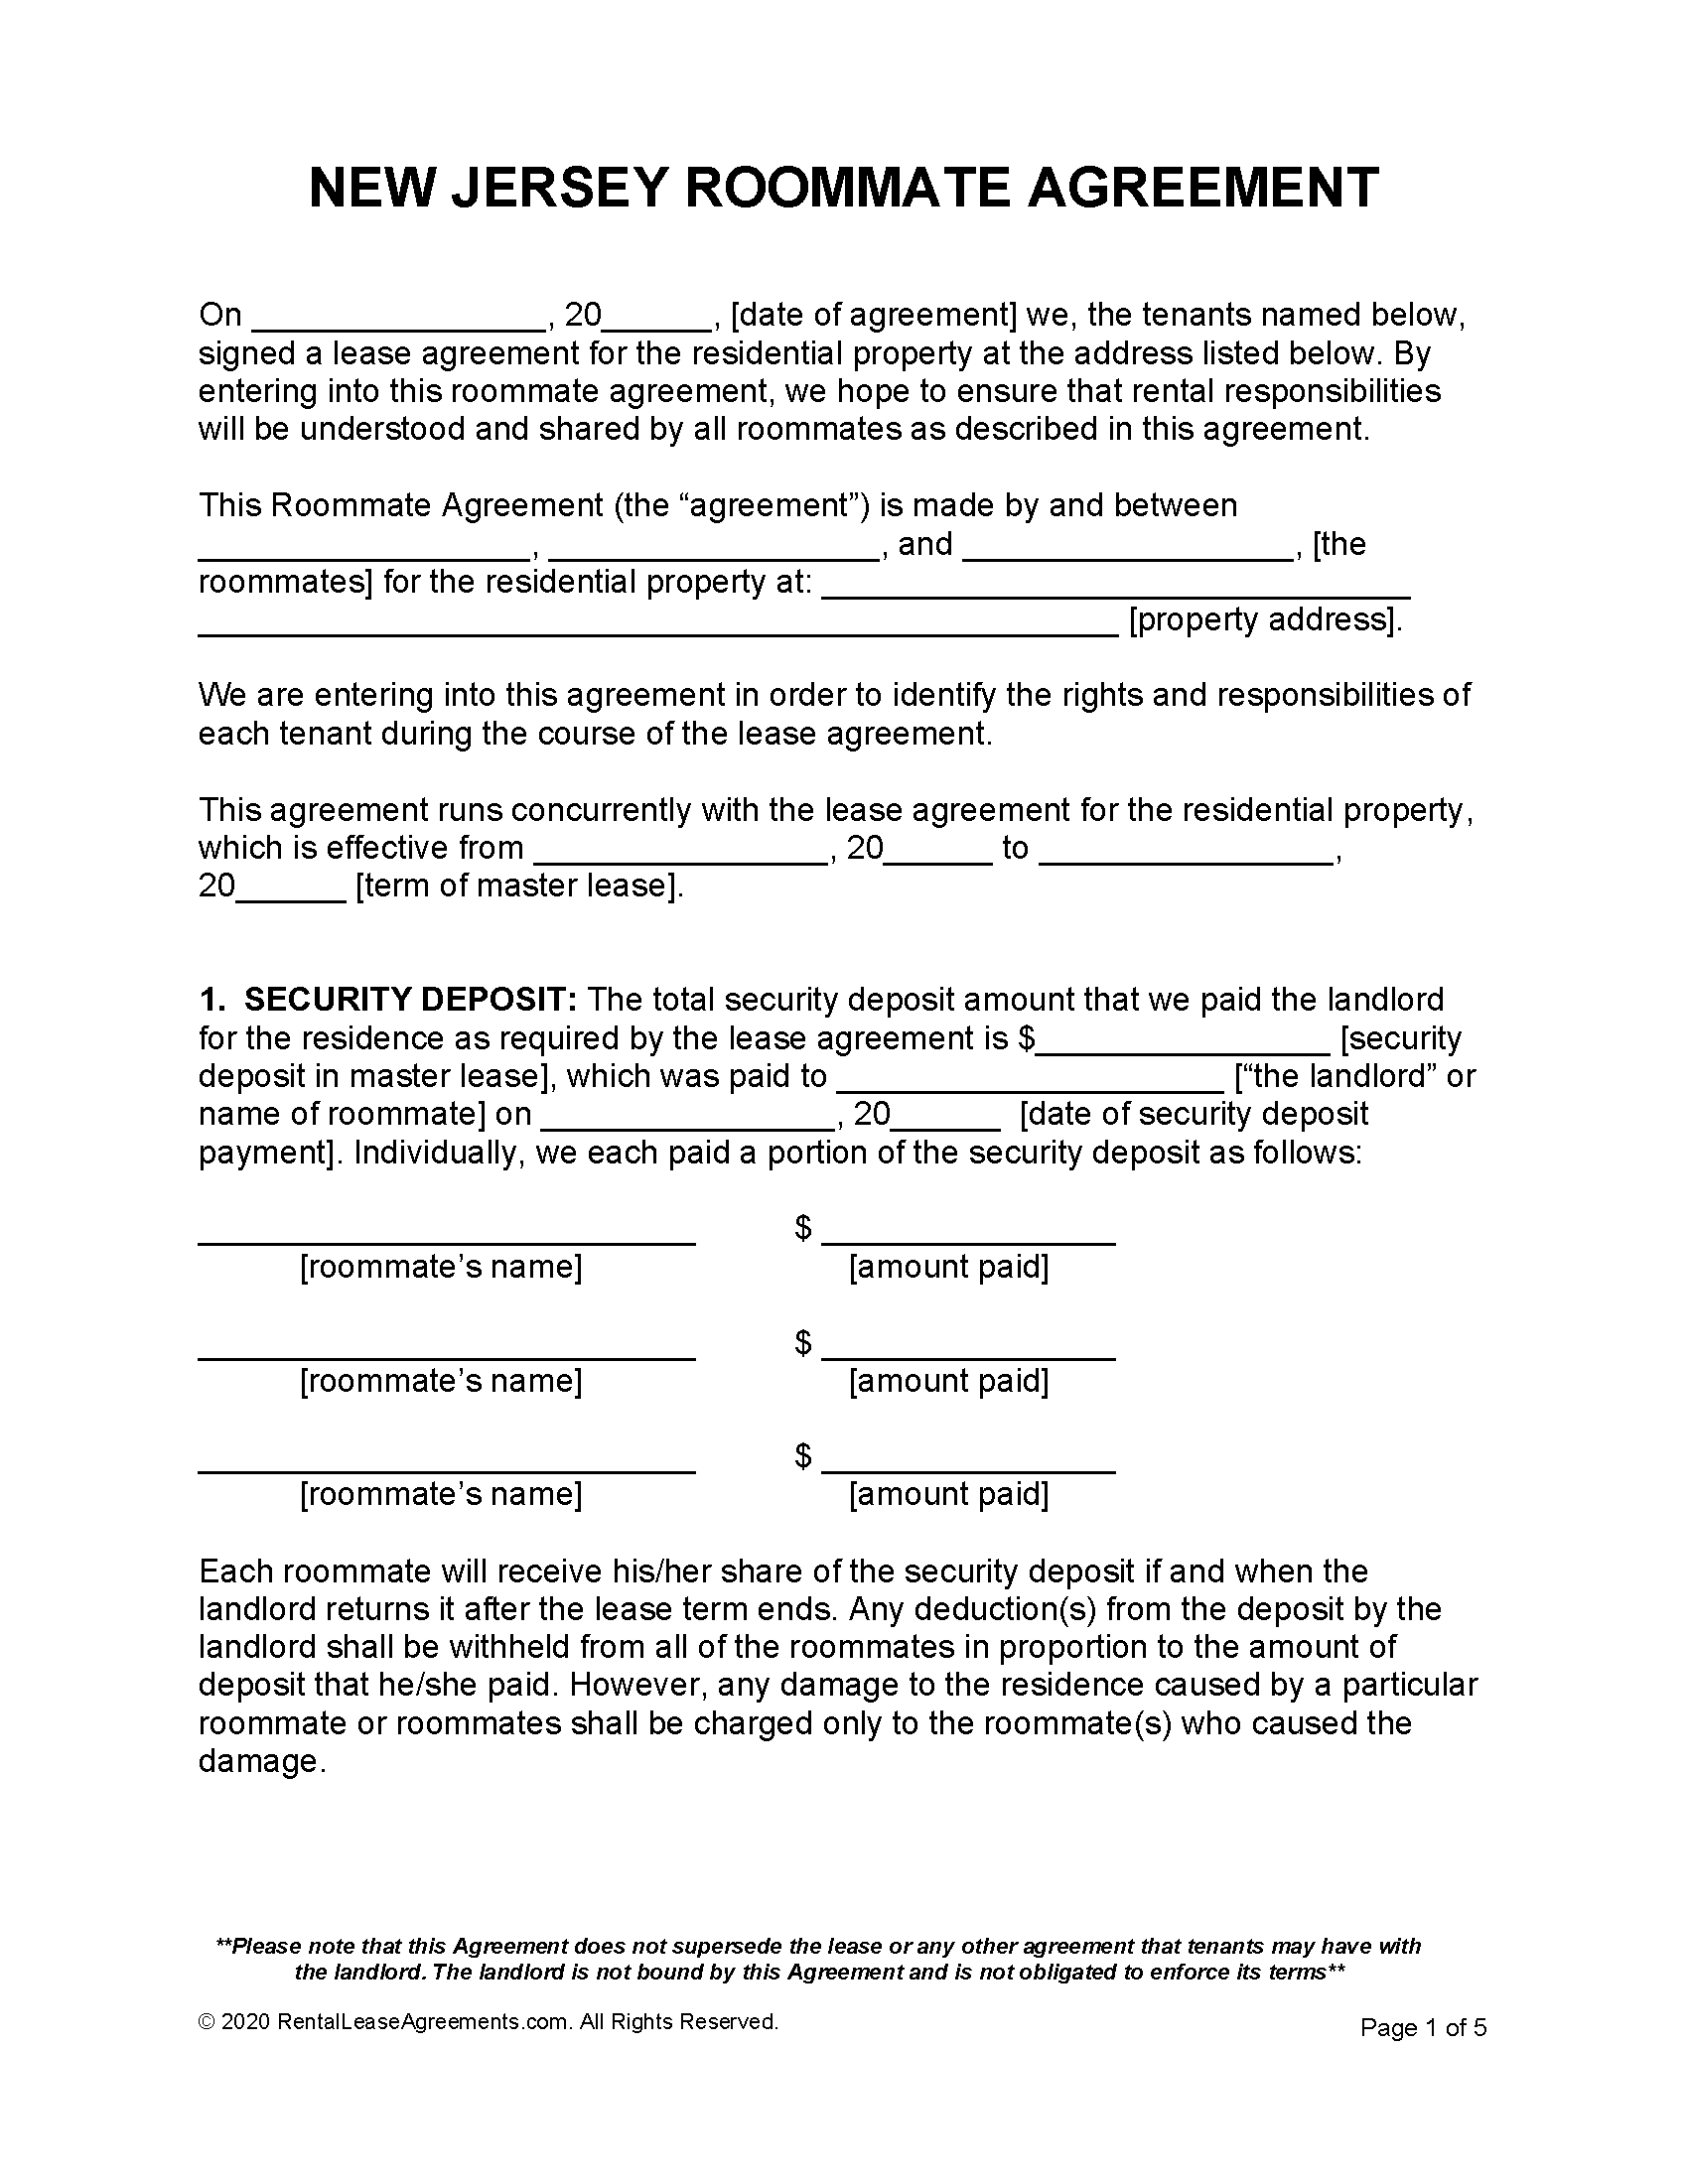 free-new-jersey-roommate-agreement-pdf-ms-word